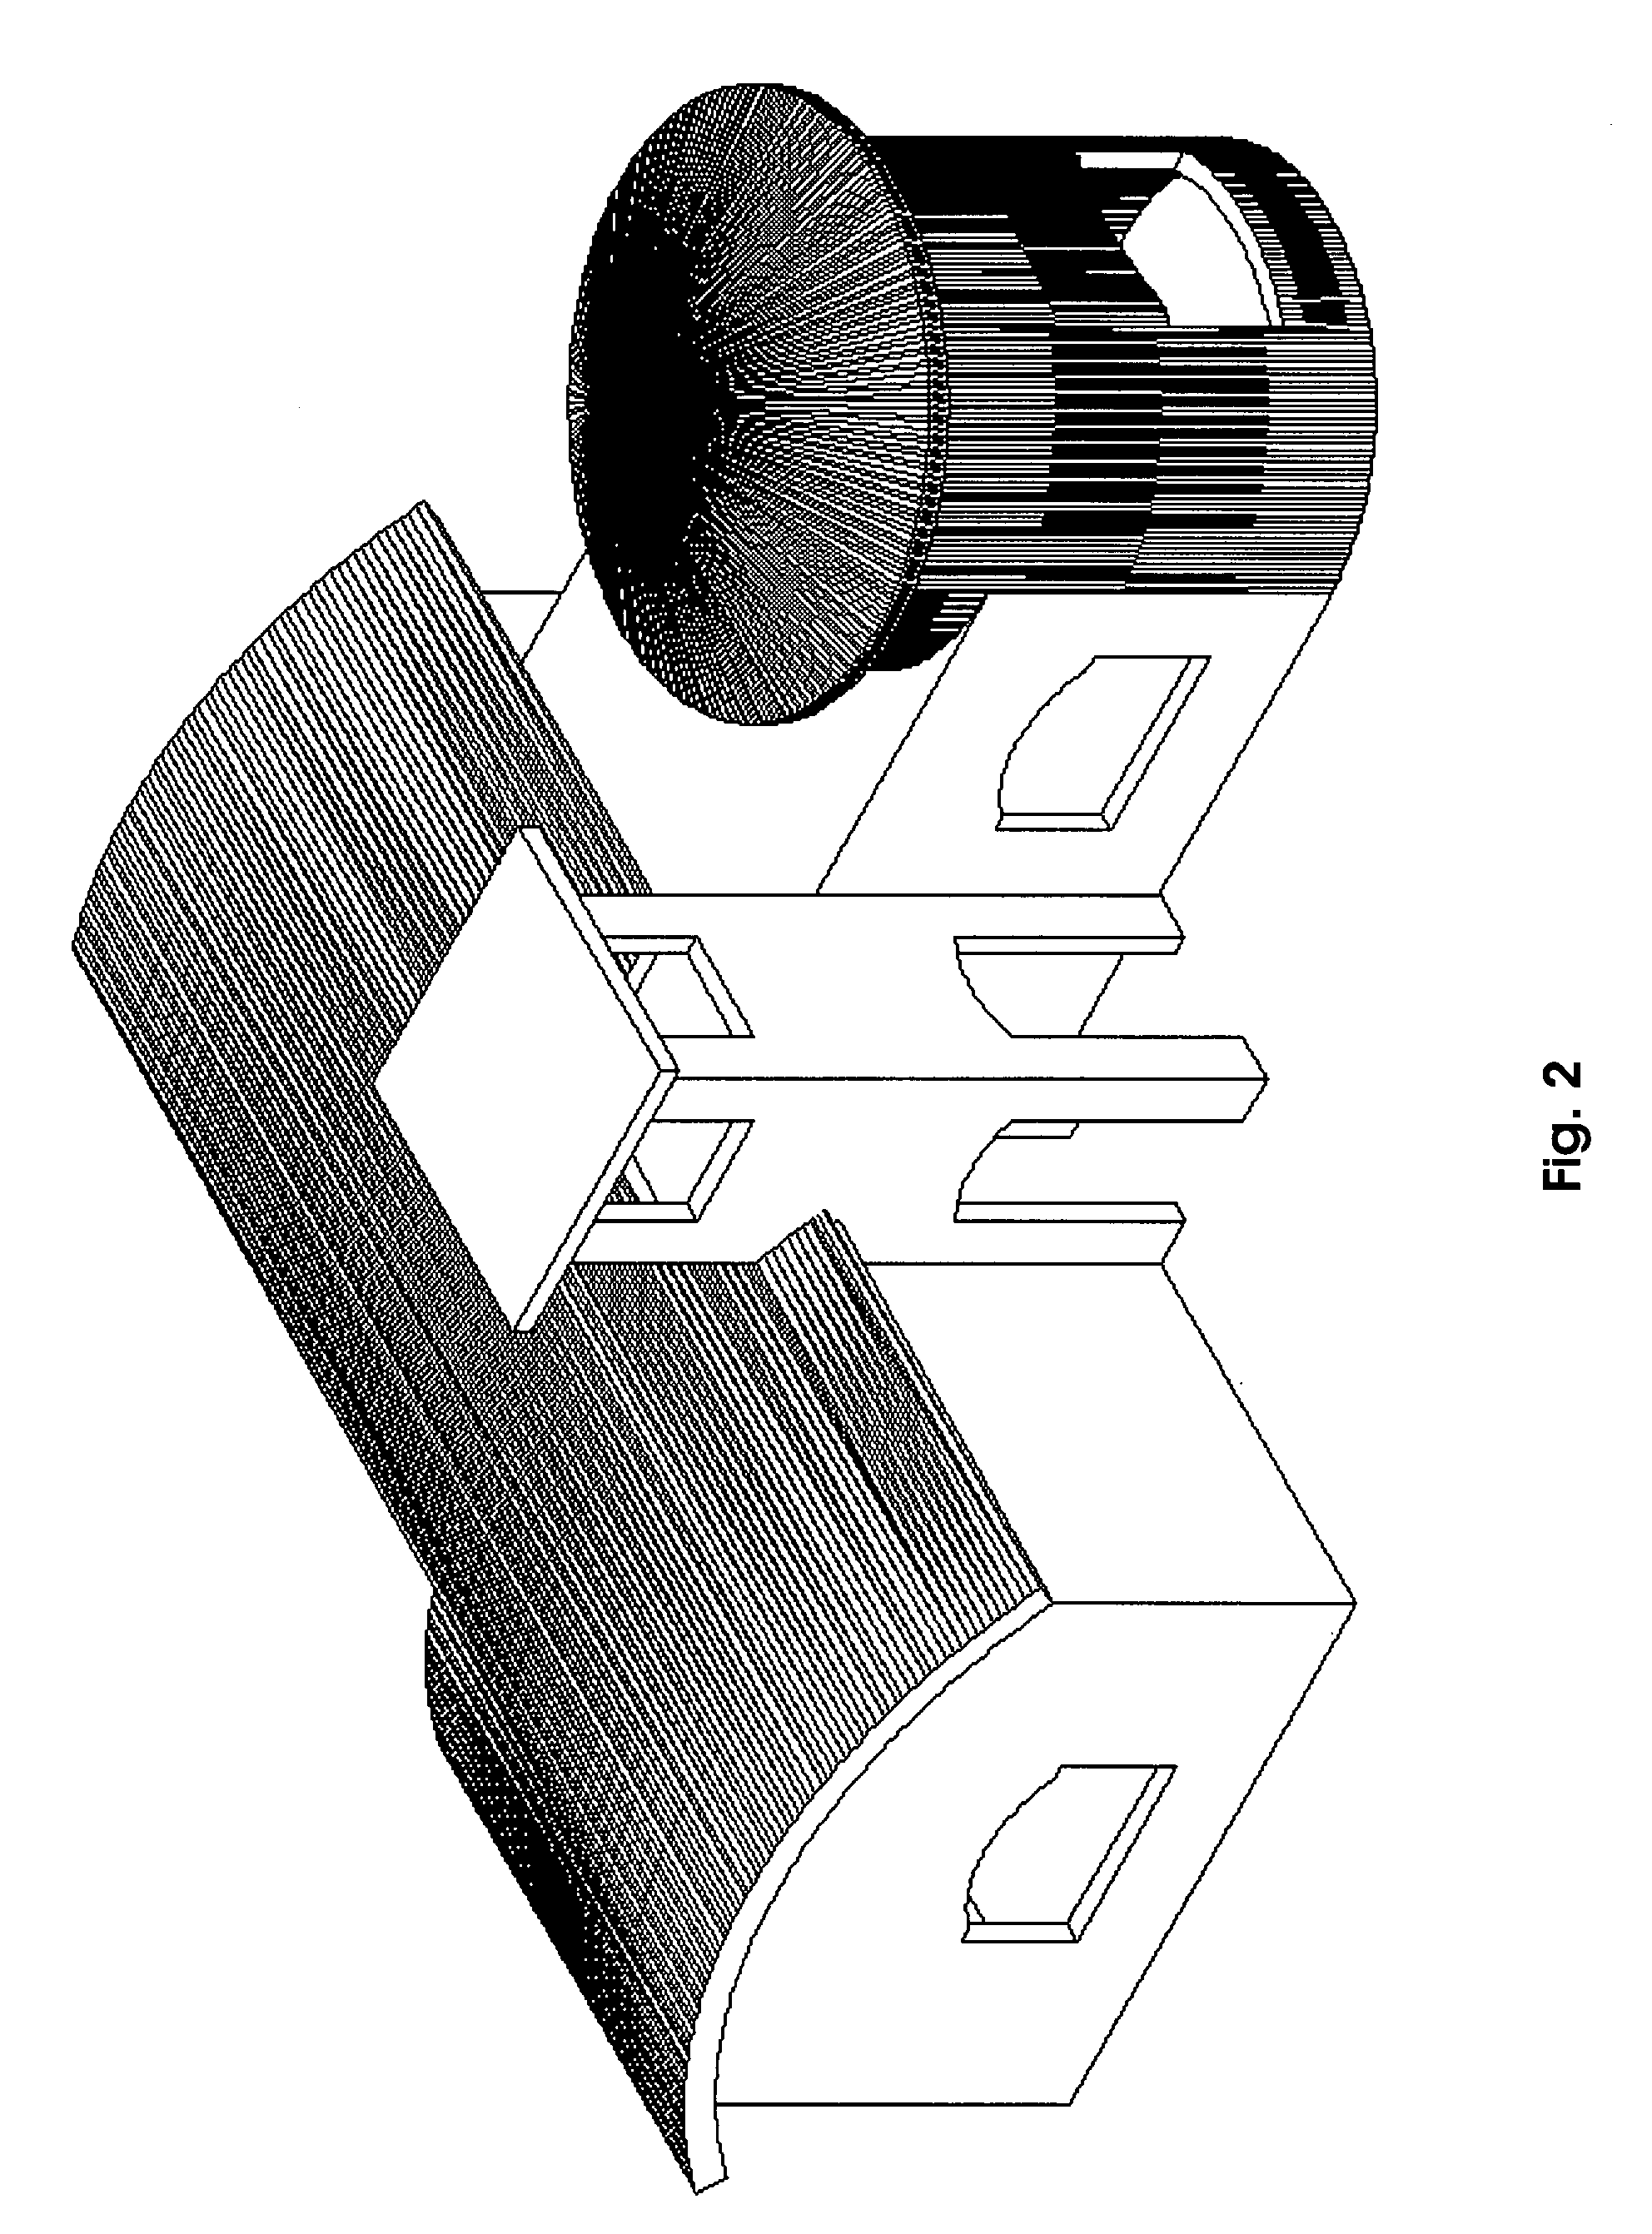 Method of performing a finite element analysis of a composite structure